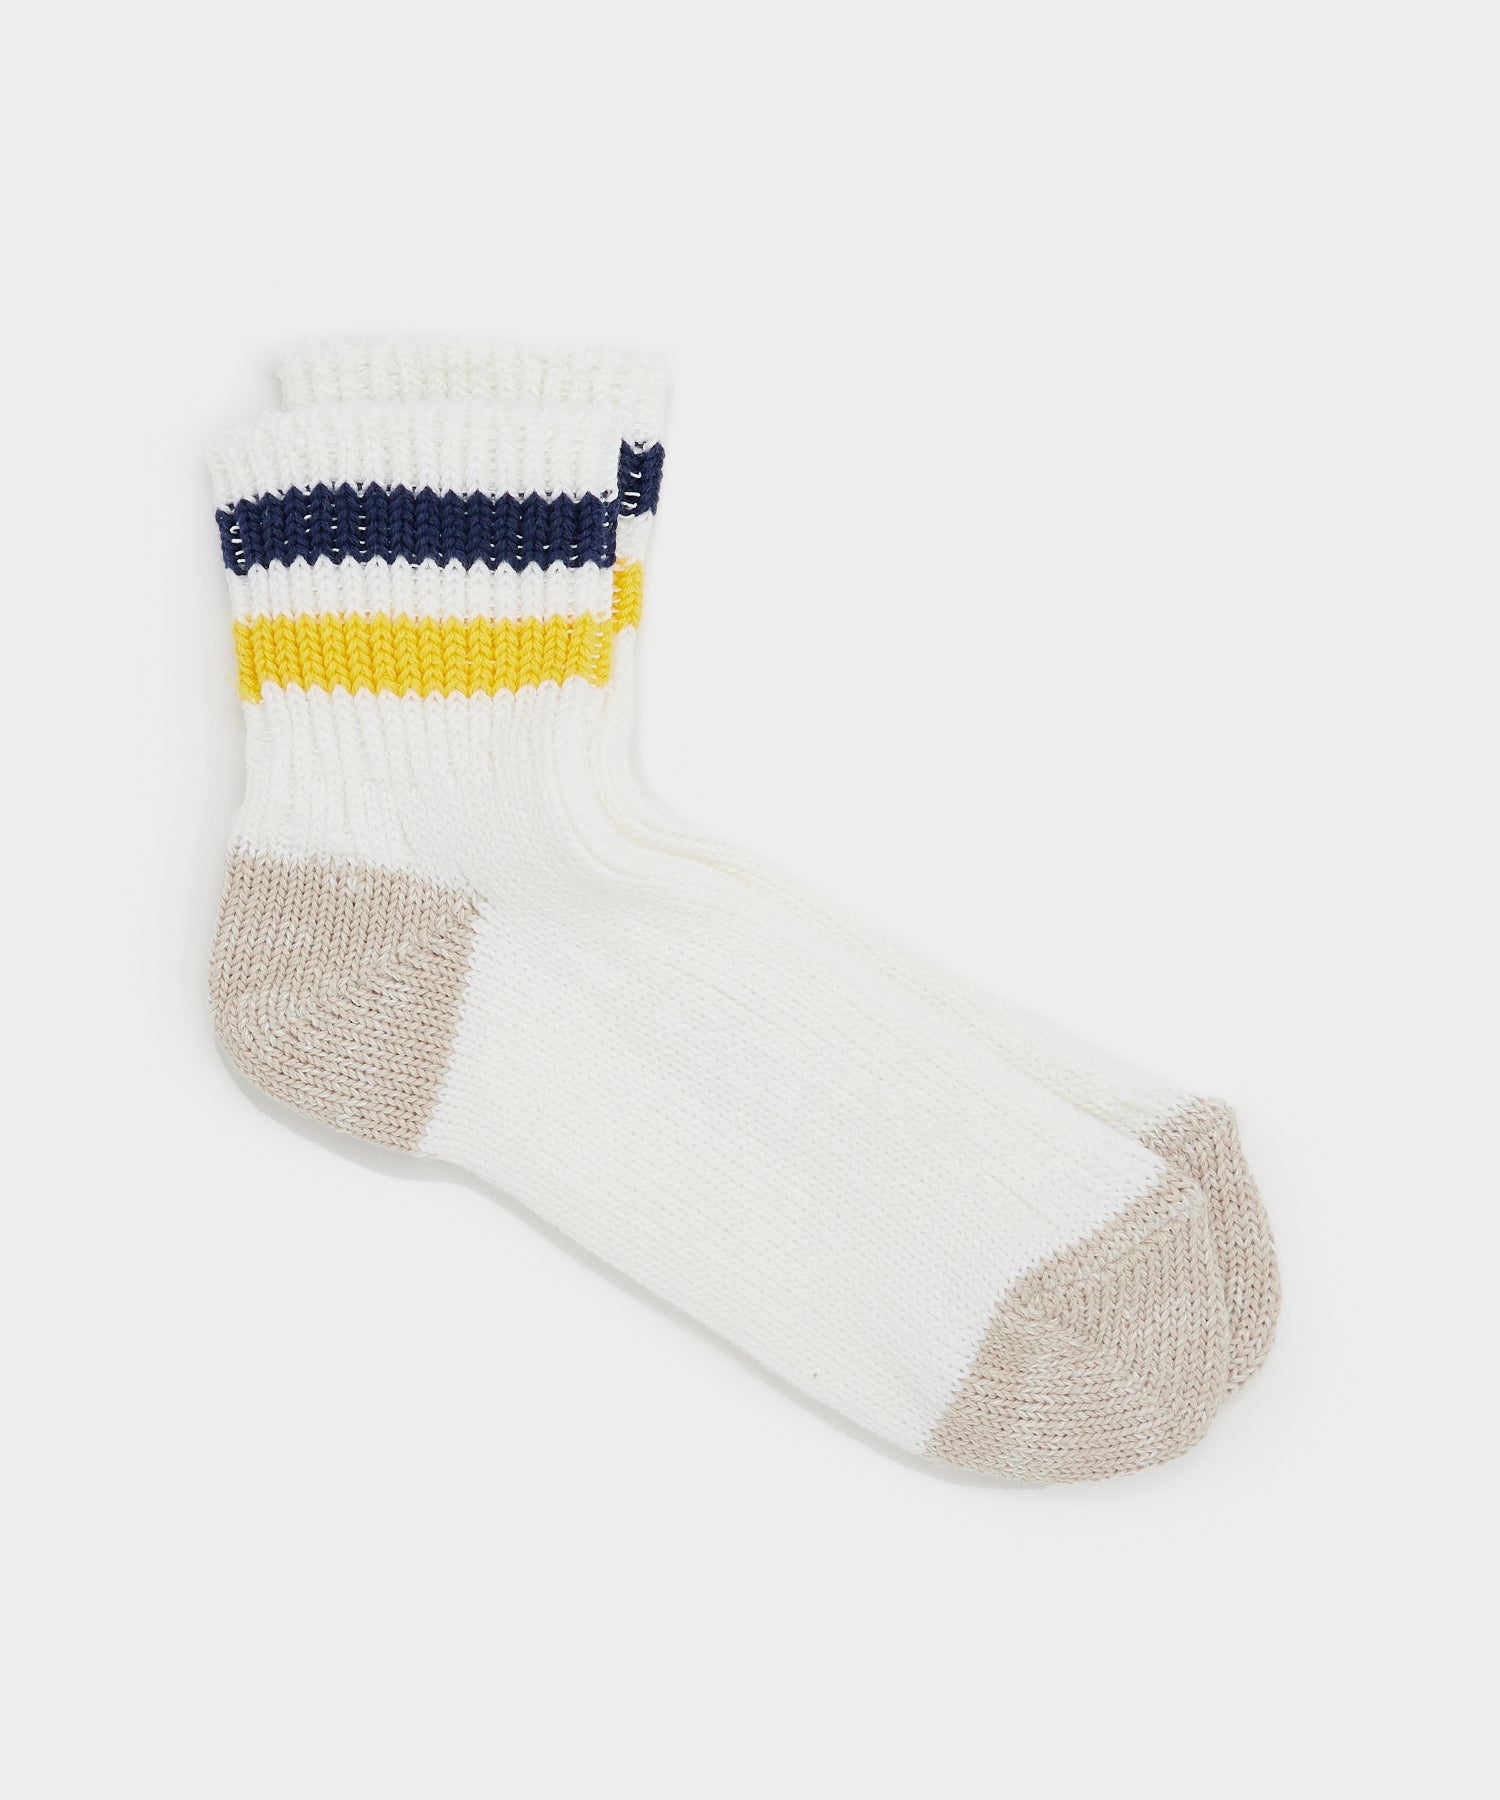 RoToTo Old School Ankle Sock in Navy/Yellow